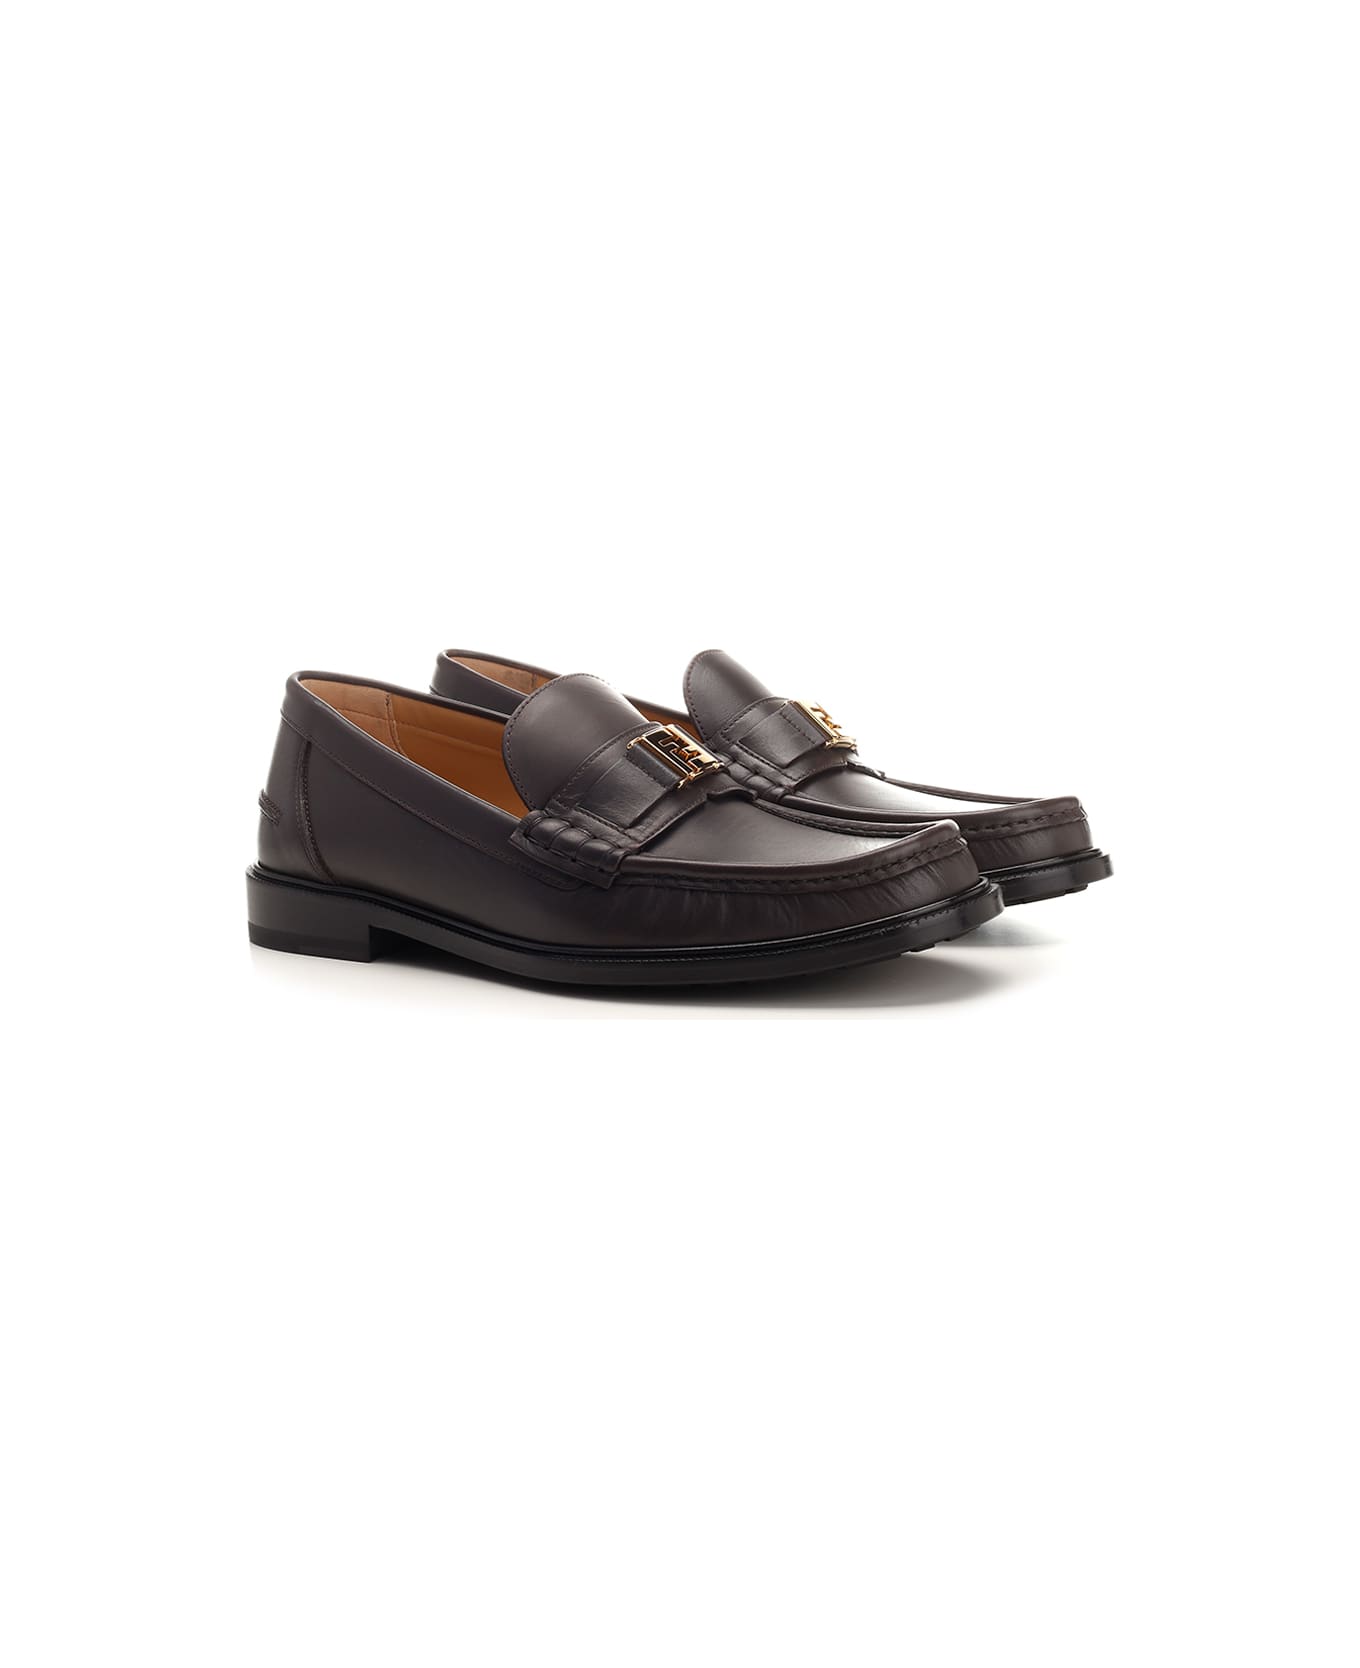 Fendi 'ff Squared' Loafers - Brown